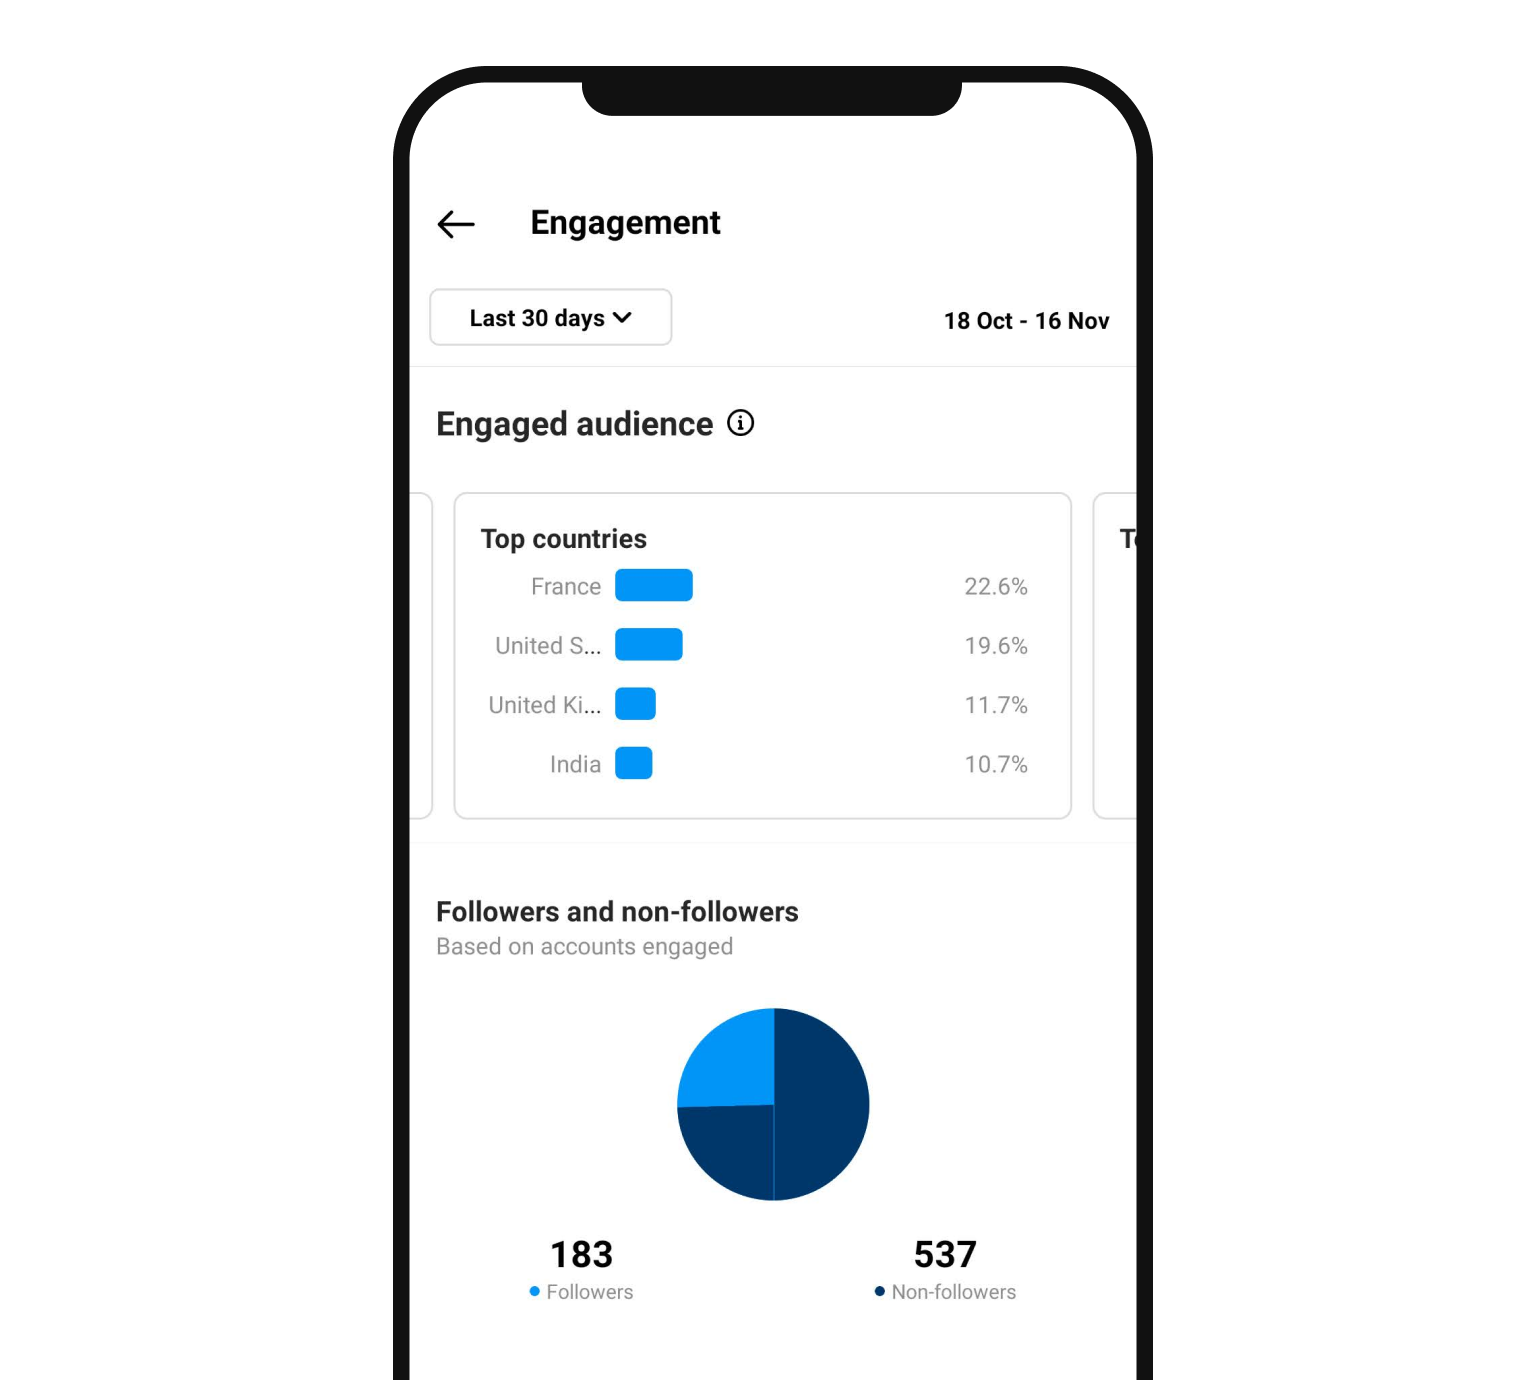 Instagram analytics dashboard, showing audience engagement stats and top countries